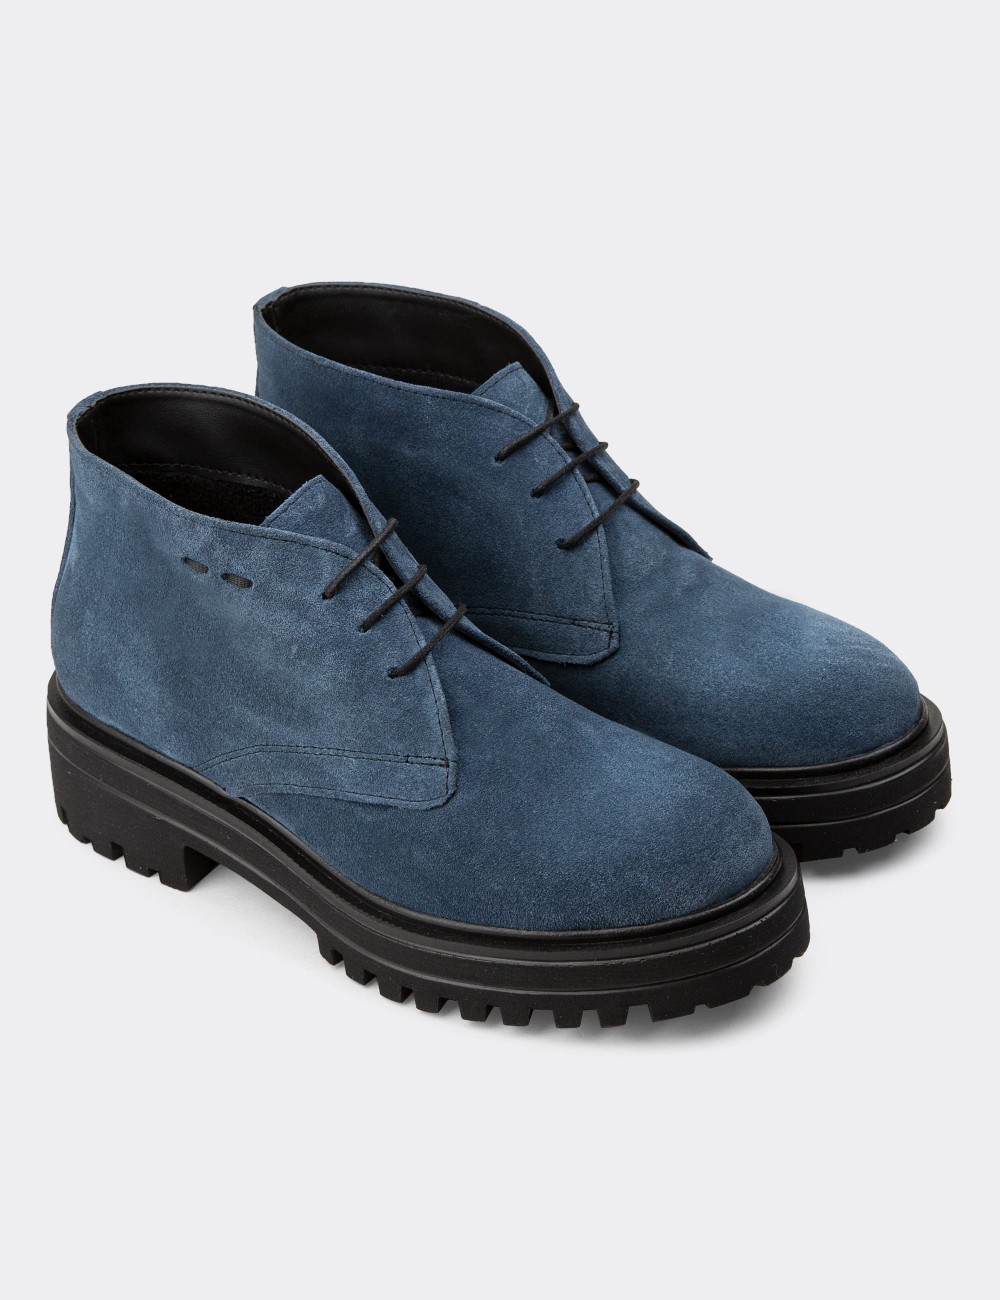 Blue Suede Leather Boots - 01847ZMVIE01